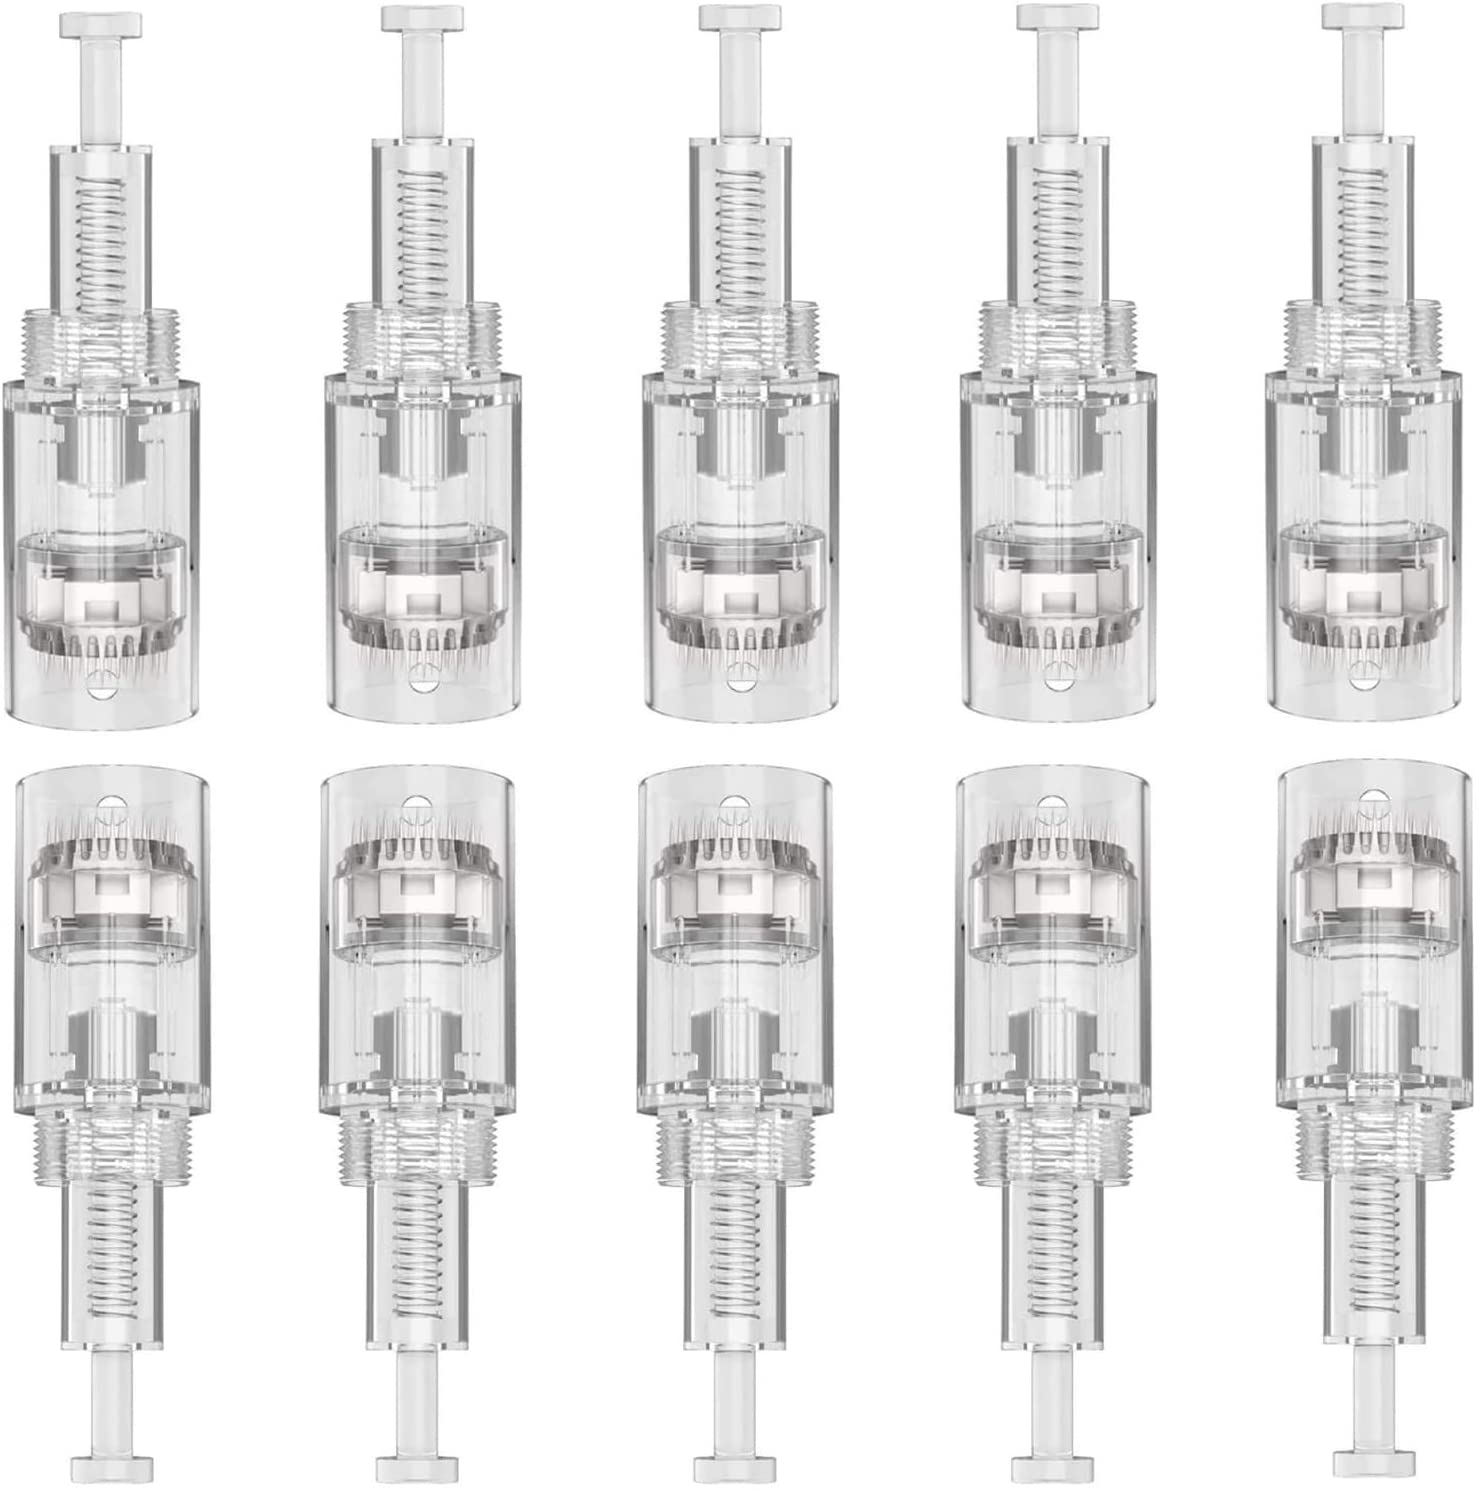 P-Beauty Cosmetic Accessories Dermapen 42 Needle Cartridges Replacement Needle Cartridges for Car Derma Electric Pen Microneedling Thread Closure Thread Slot Pack of 10 (42-Nano)